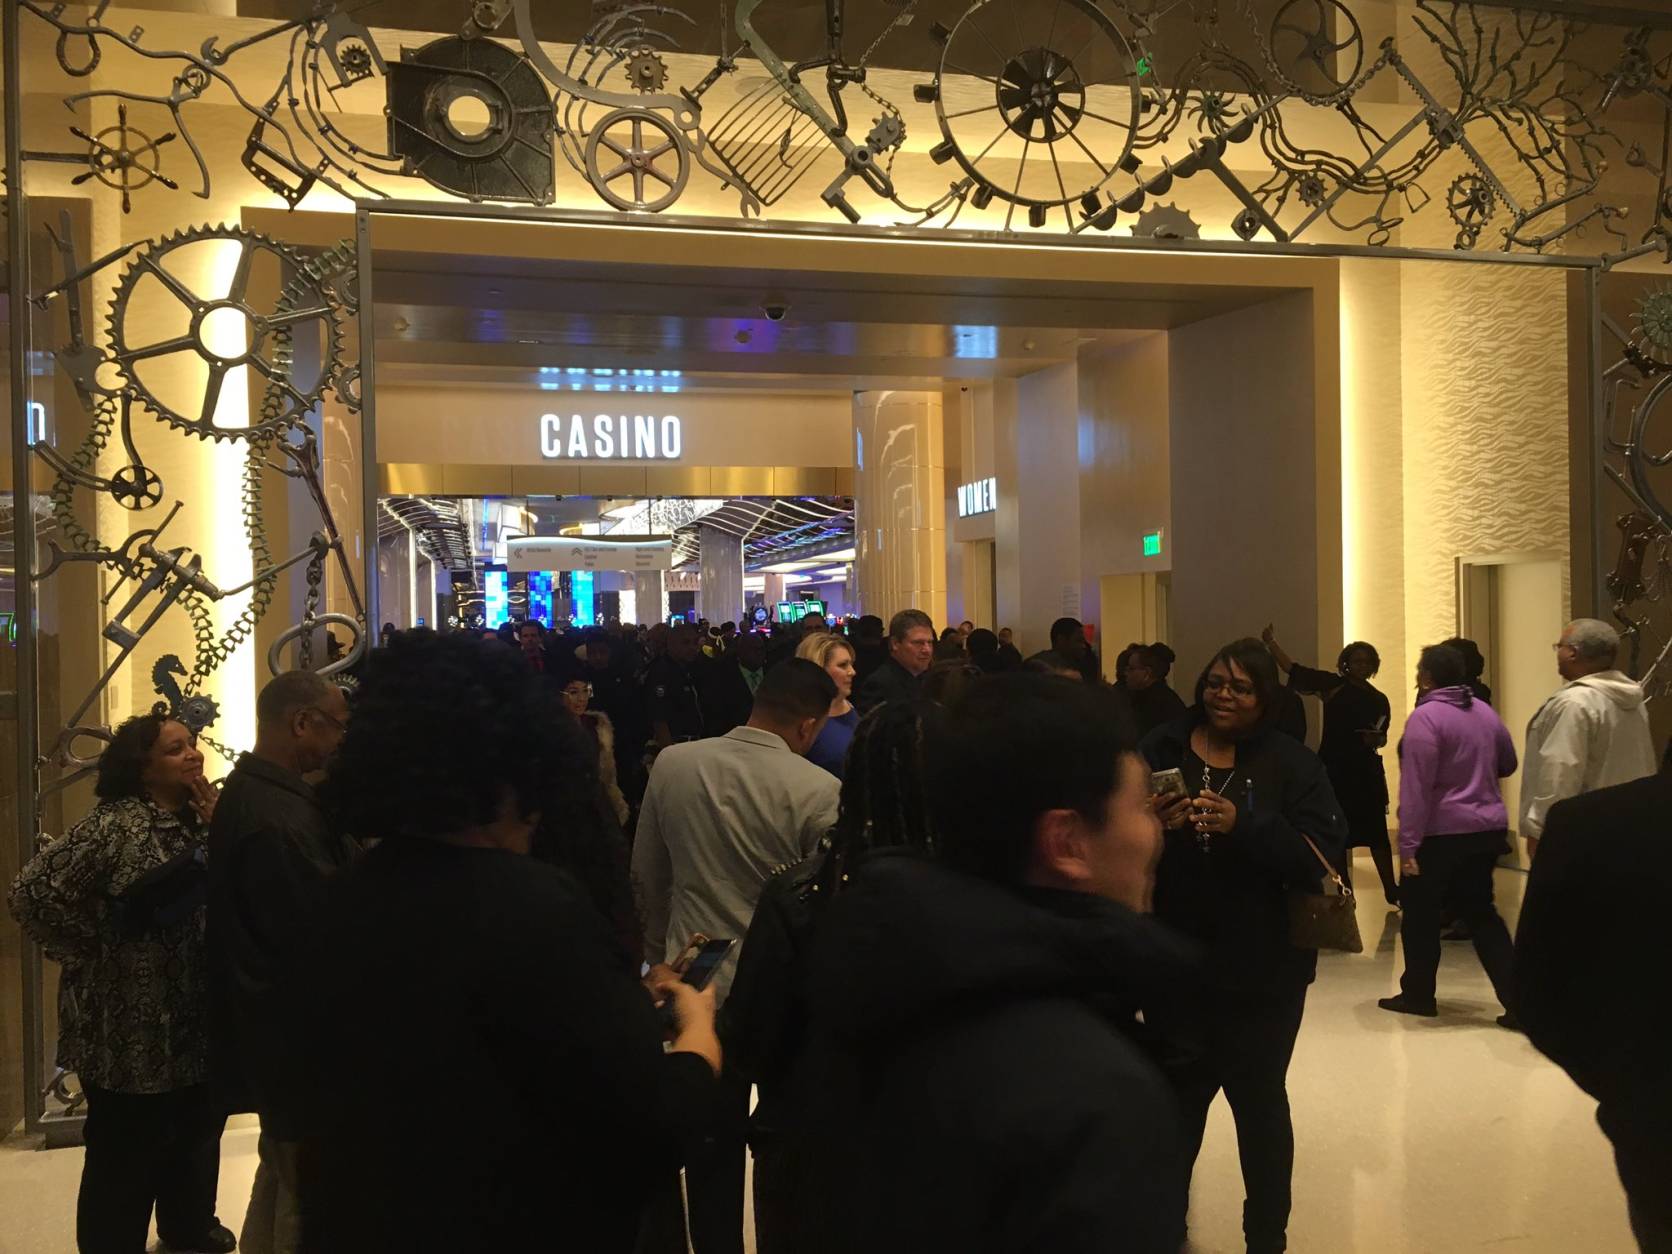 People went straight for the casino on opening night. (WTOP/Mike Murillo)